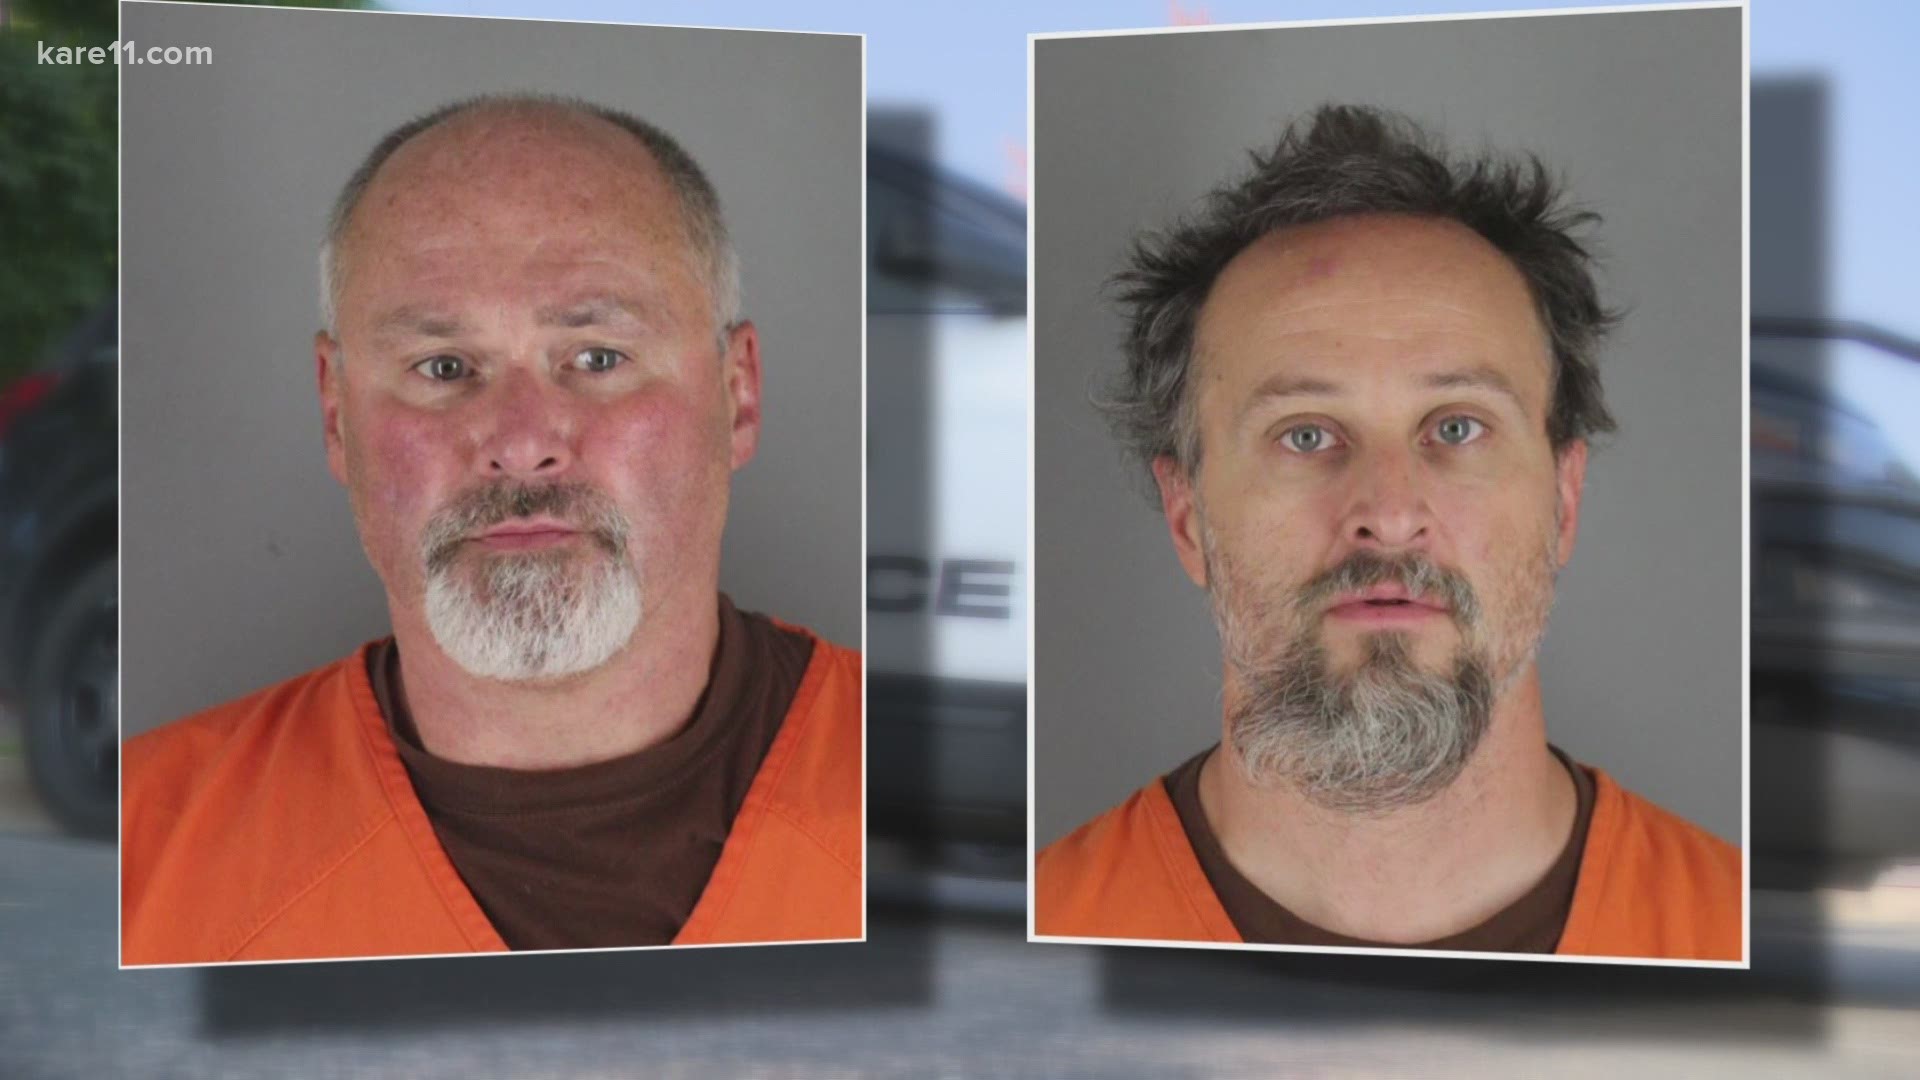 Danny Lee Denzer, 56, of Mounds View and Robert Lawrence Gabrio, 45, of Aitken have both been charged with first-degree burglary.